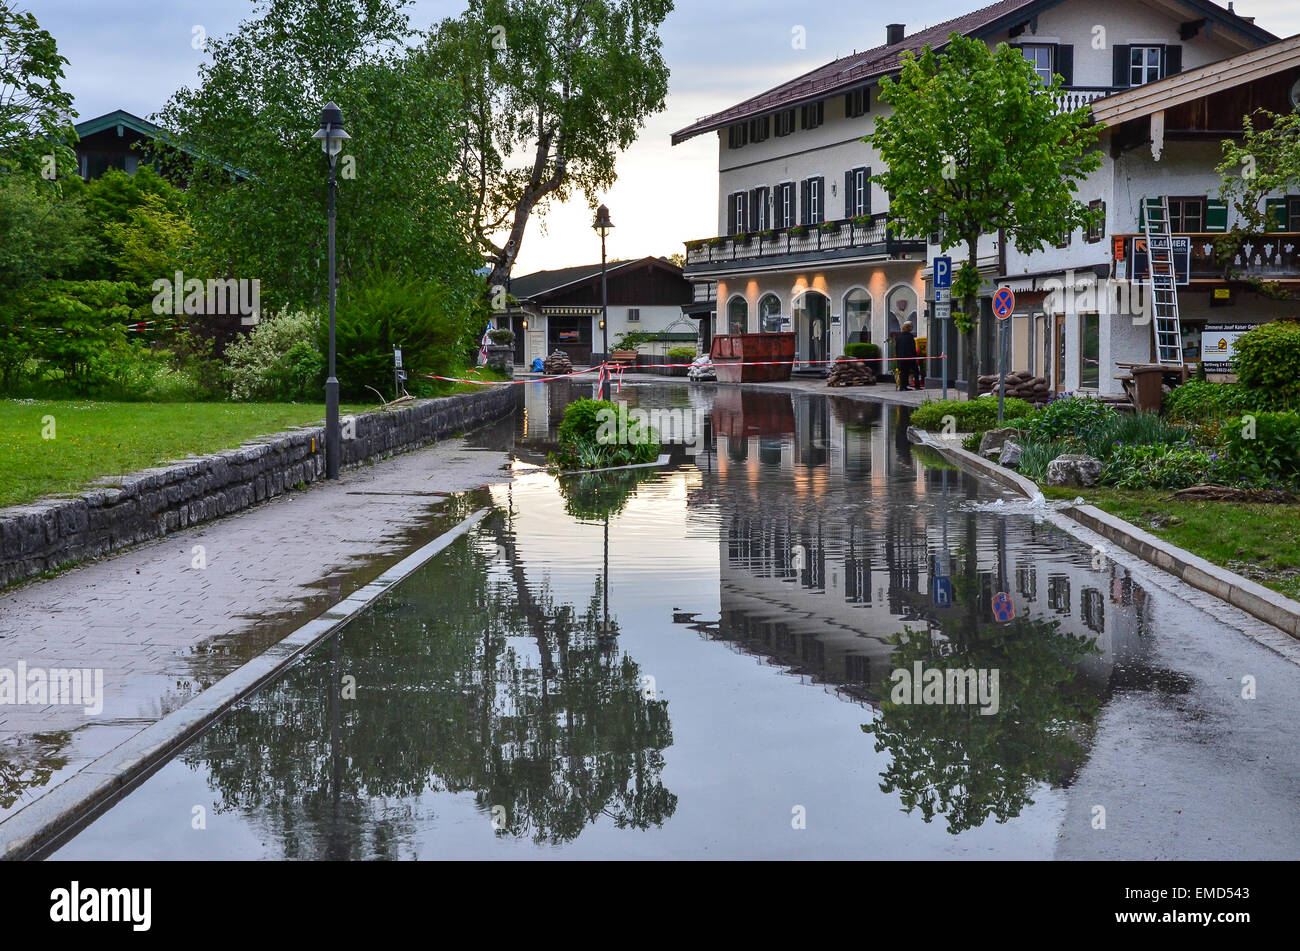 Severe flooding at lake Tegernsee  Rottach-Egern street closed basements under water Stock Photo